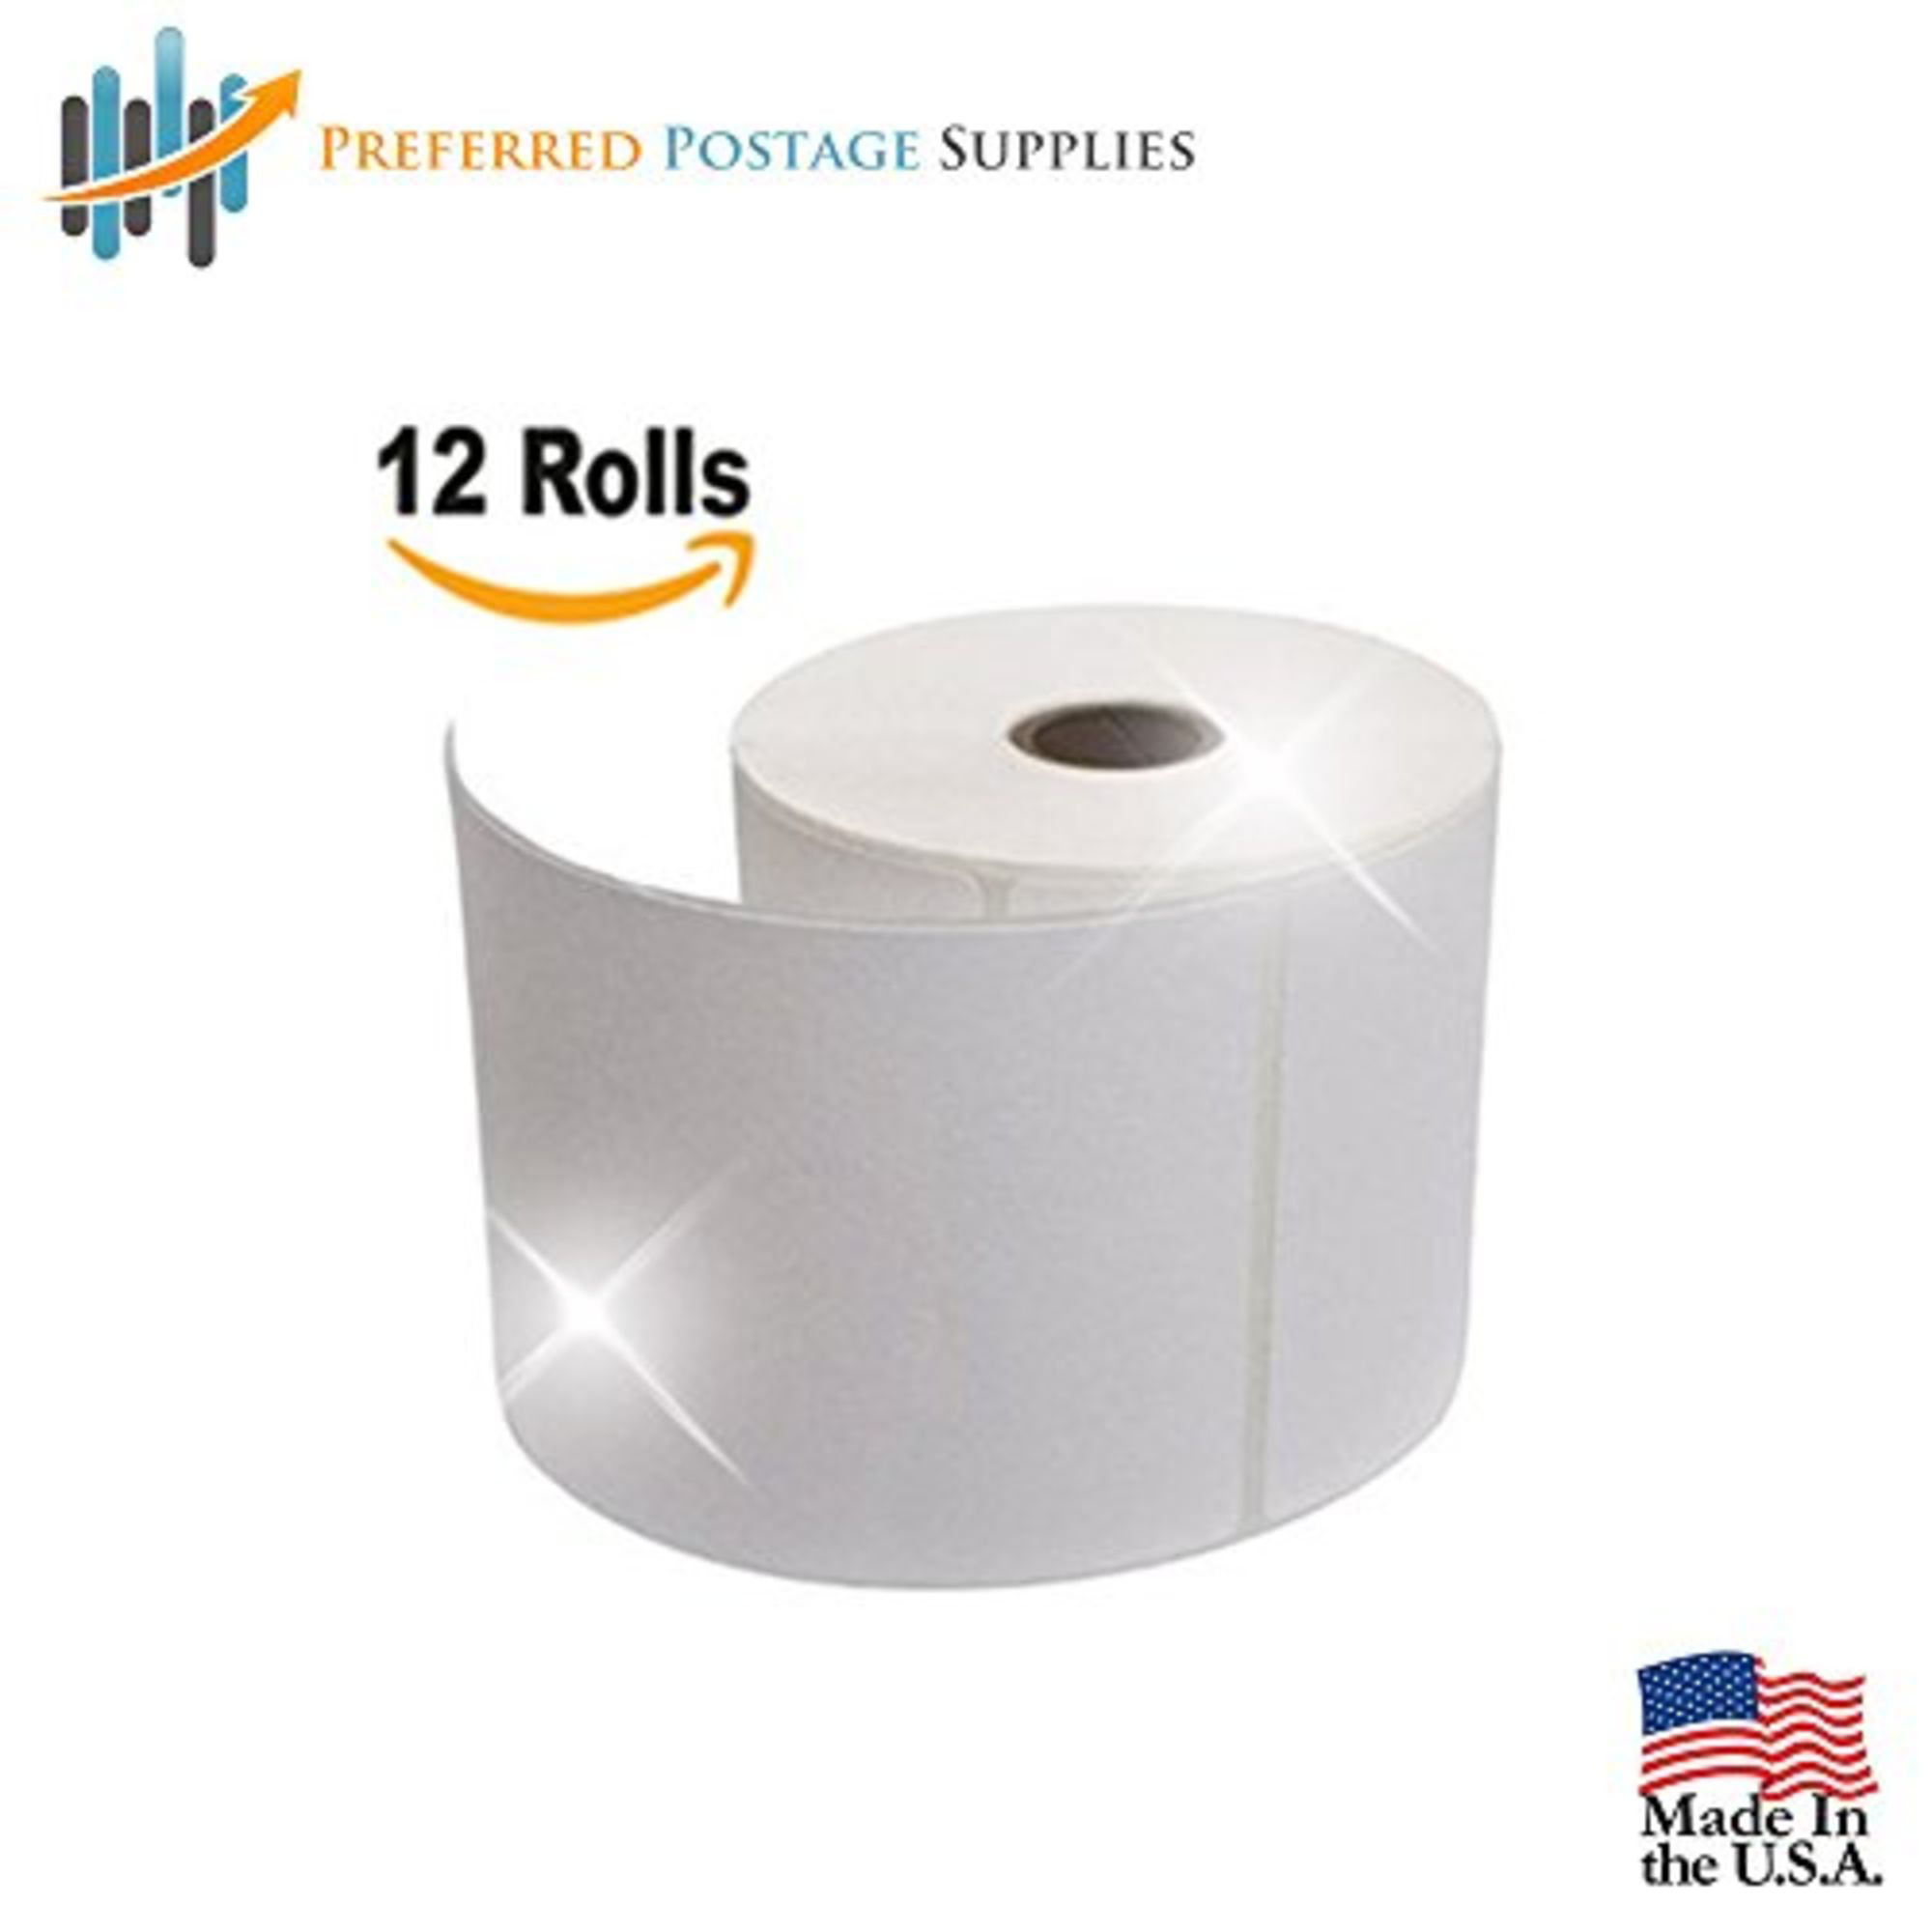 Preferred Postage Supplies Supplies ups shipping labels ...